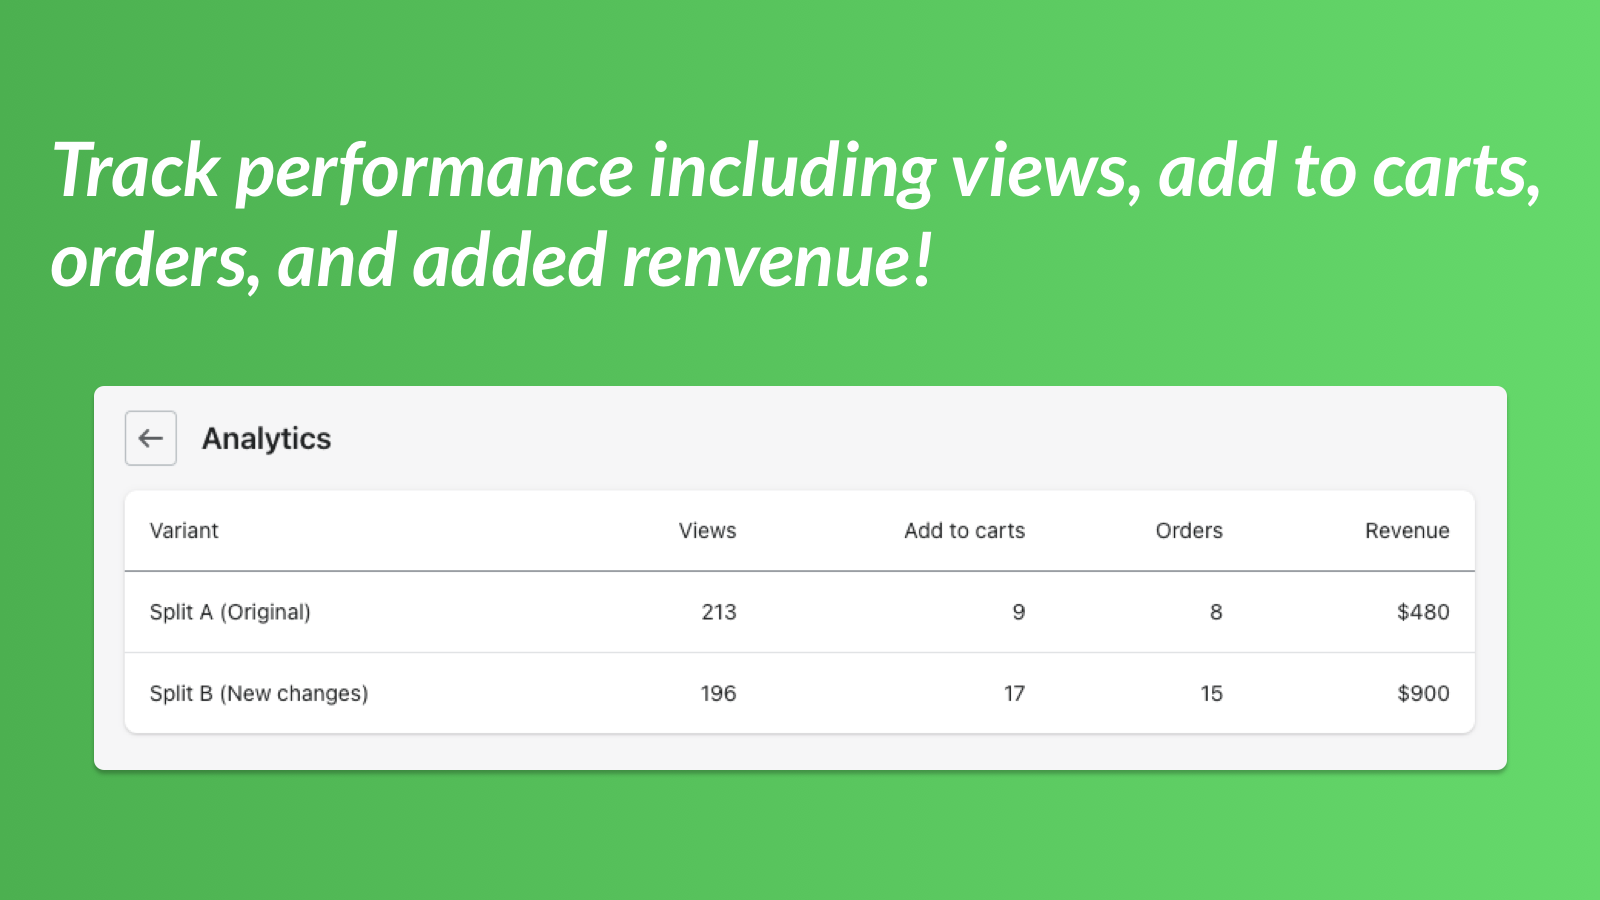 Track views, add to carts, orders, and revenue!